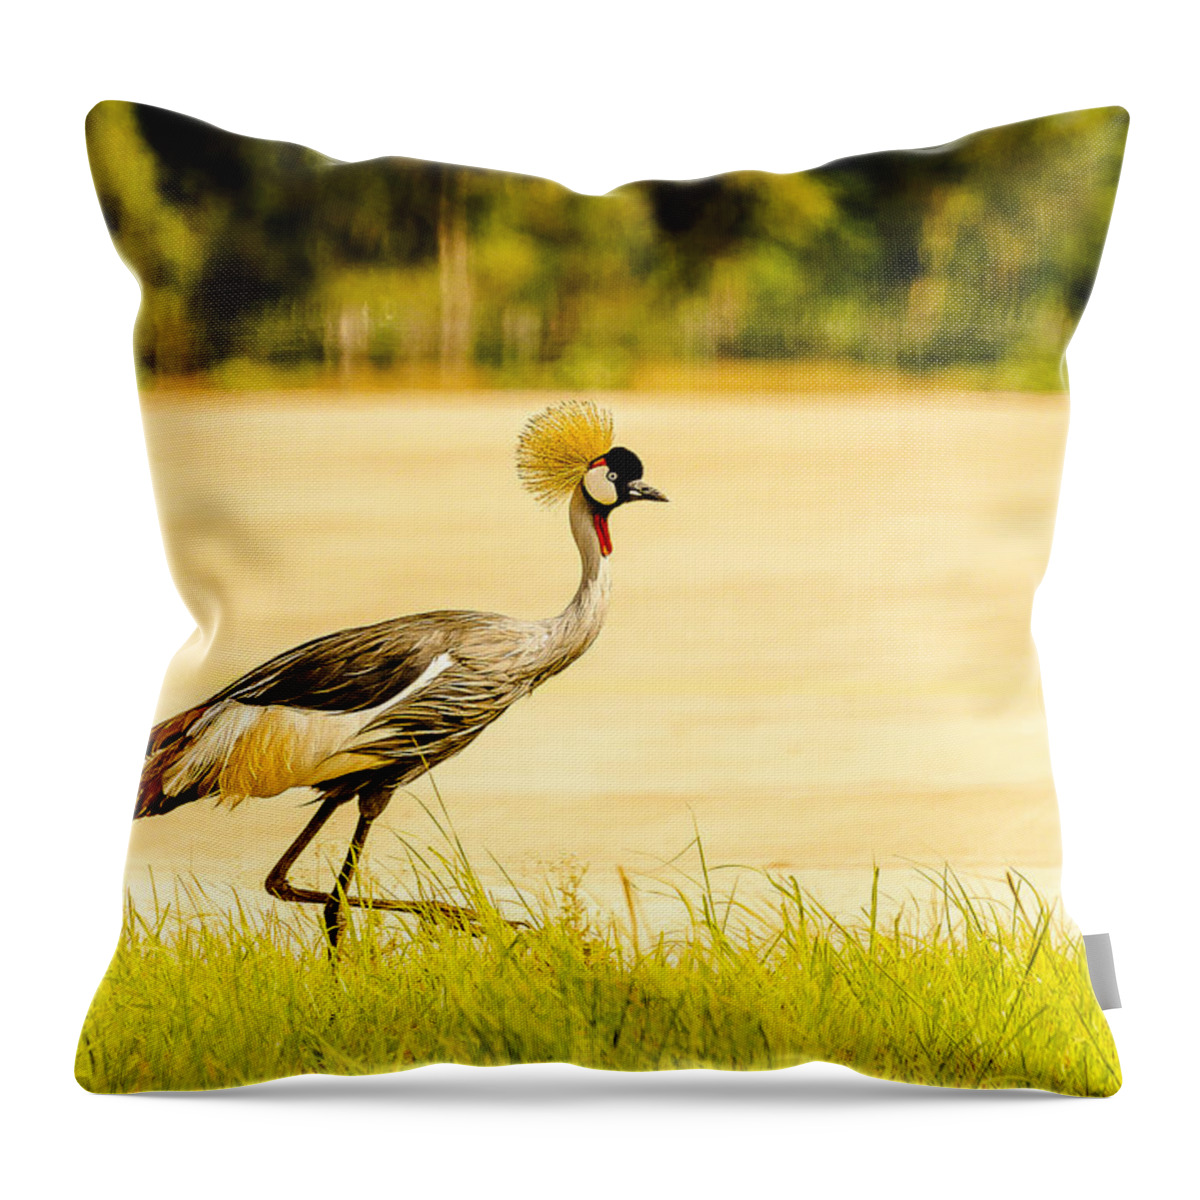 Birds Throw Pillow featuring the photograph Crested Crane by Patrick Kain